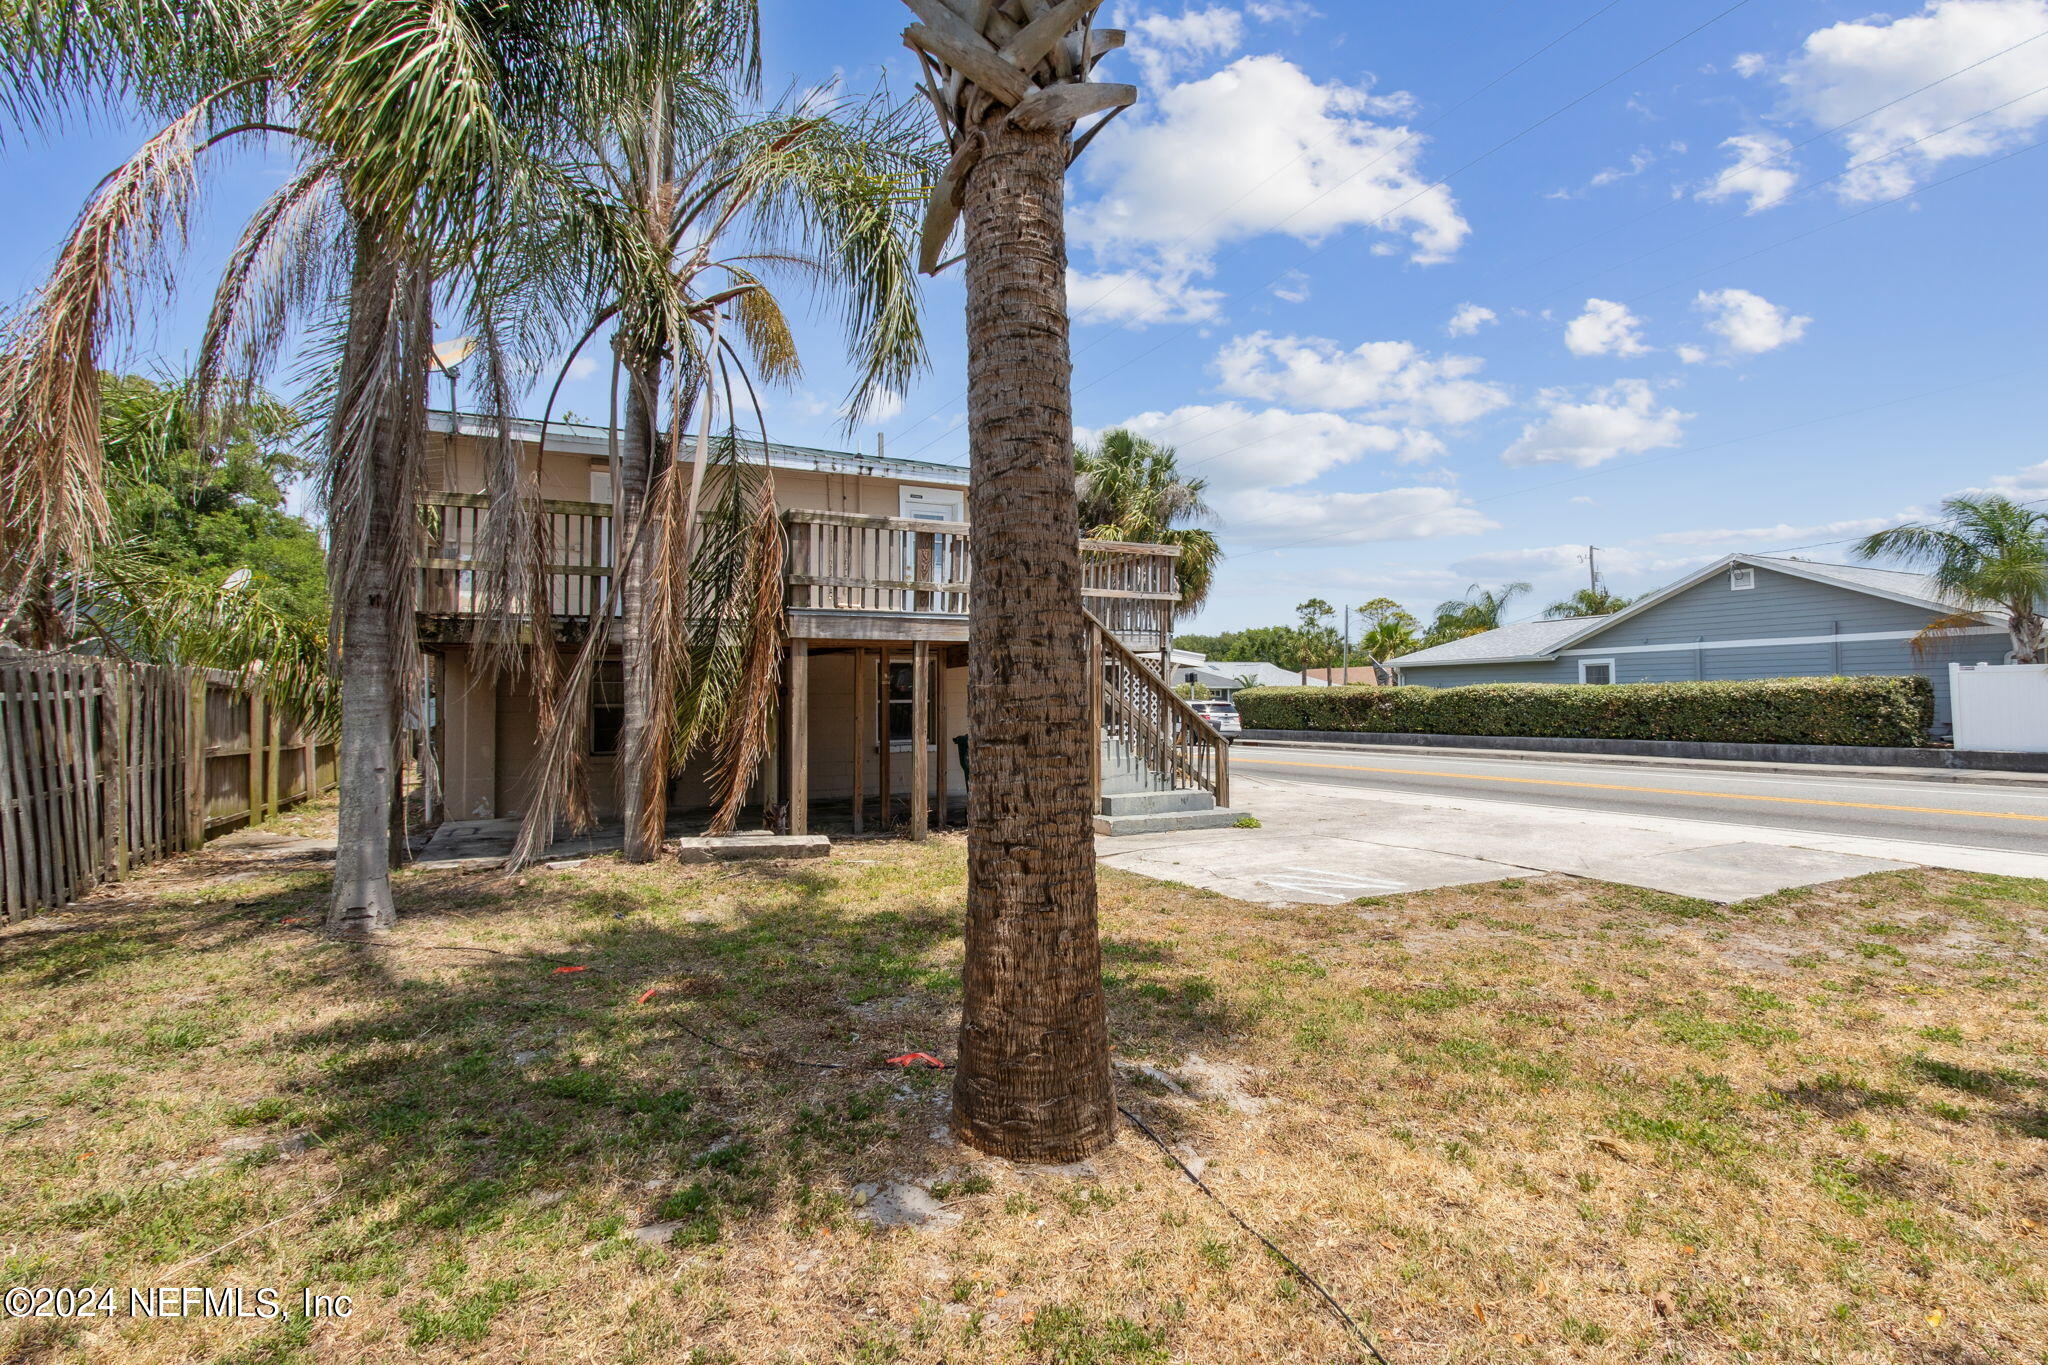 Jacksonville Beach, FL home for sale located at 1306 9th Street S, Jacksonville Beach, FL 32250